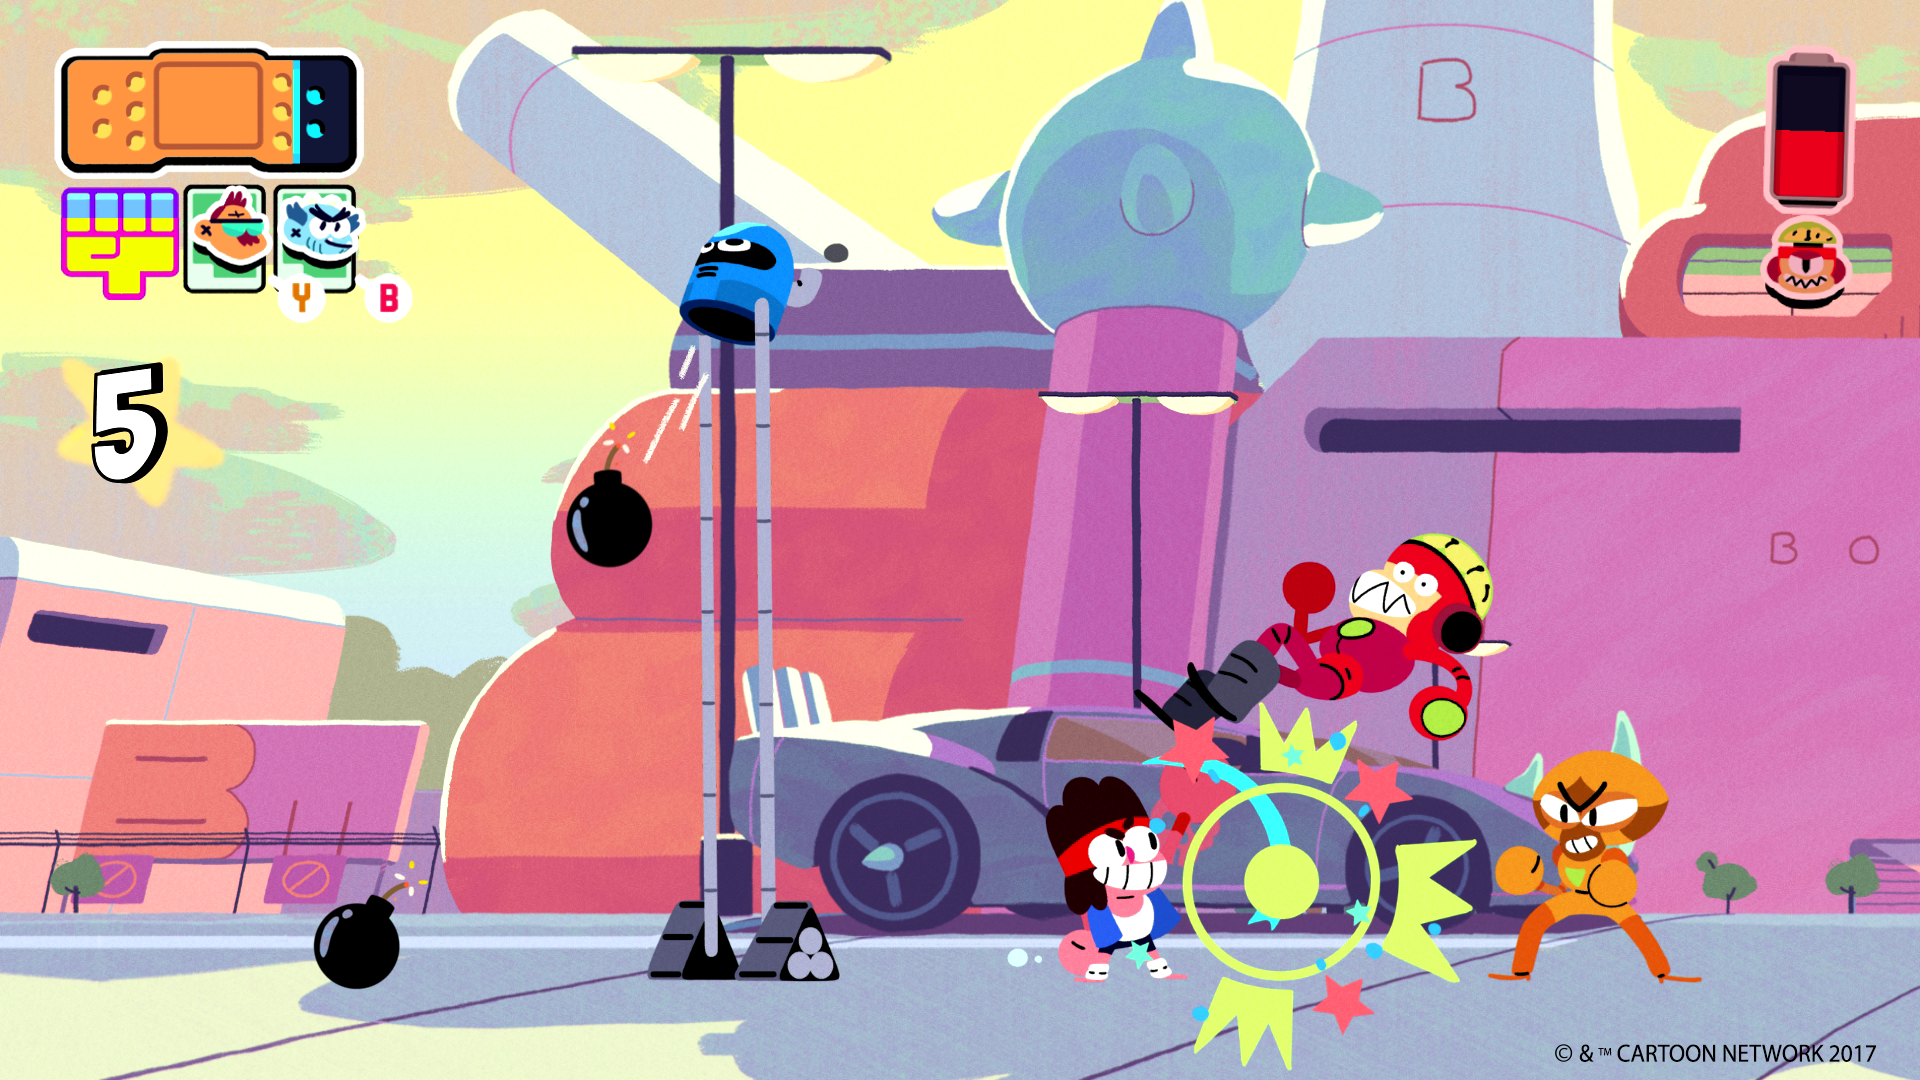 Cartoon Network Revisits Old-School Brawlers With Its Newest Show And Game  - GameSpot